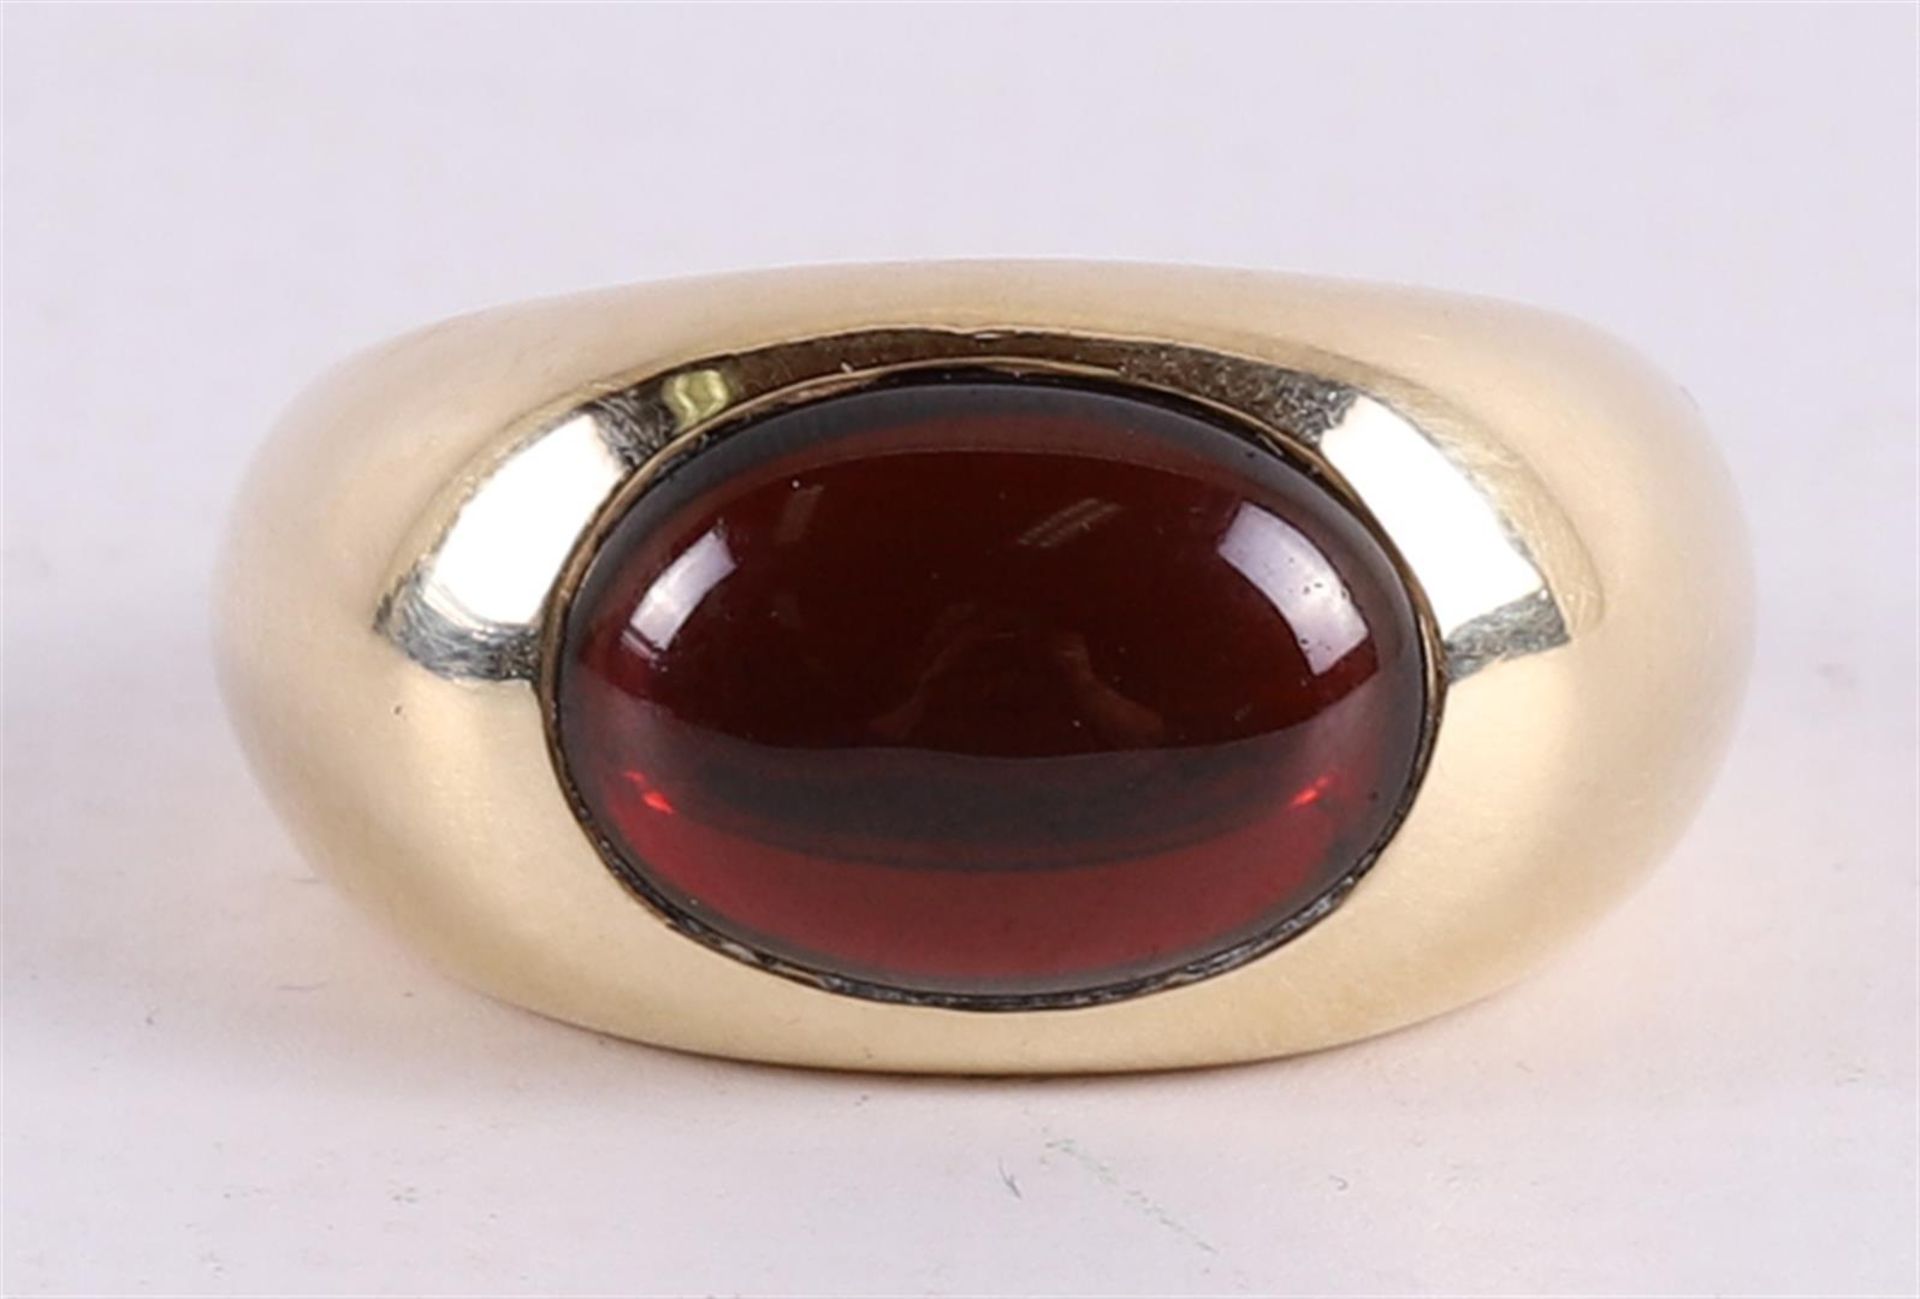 A 14 kt 585/1000 yellow gold ring, set with a cabochon cut red colored stone